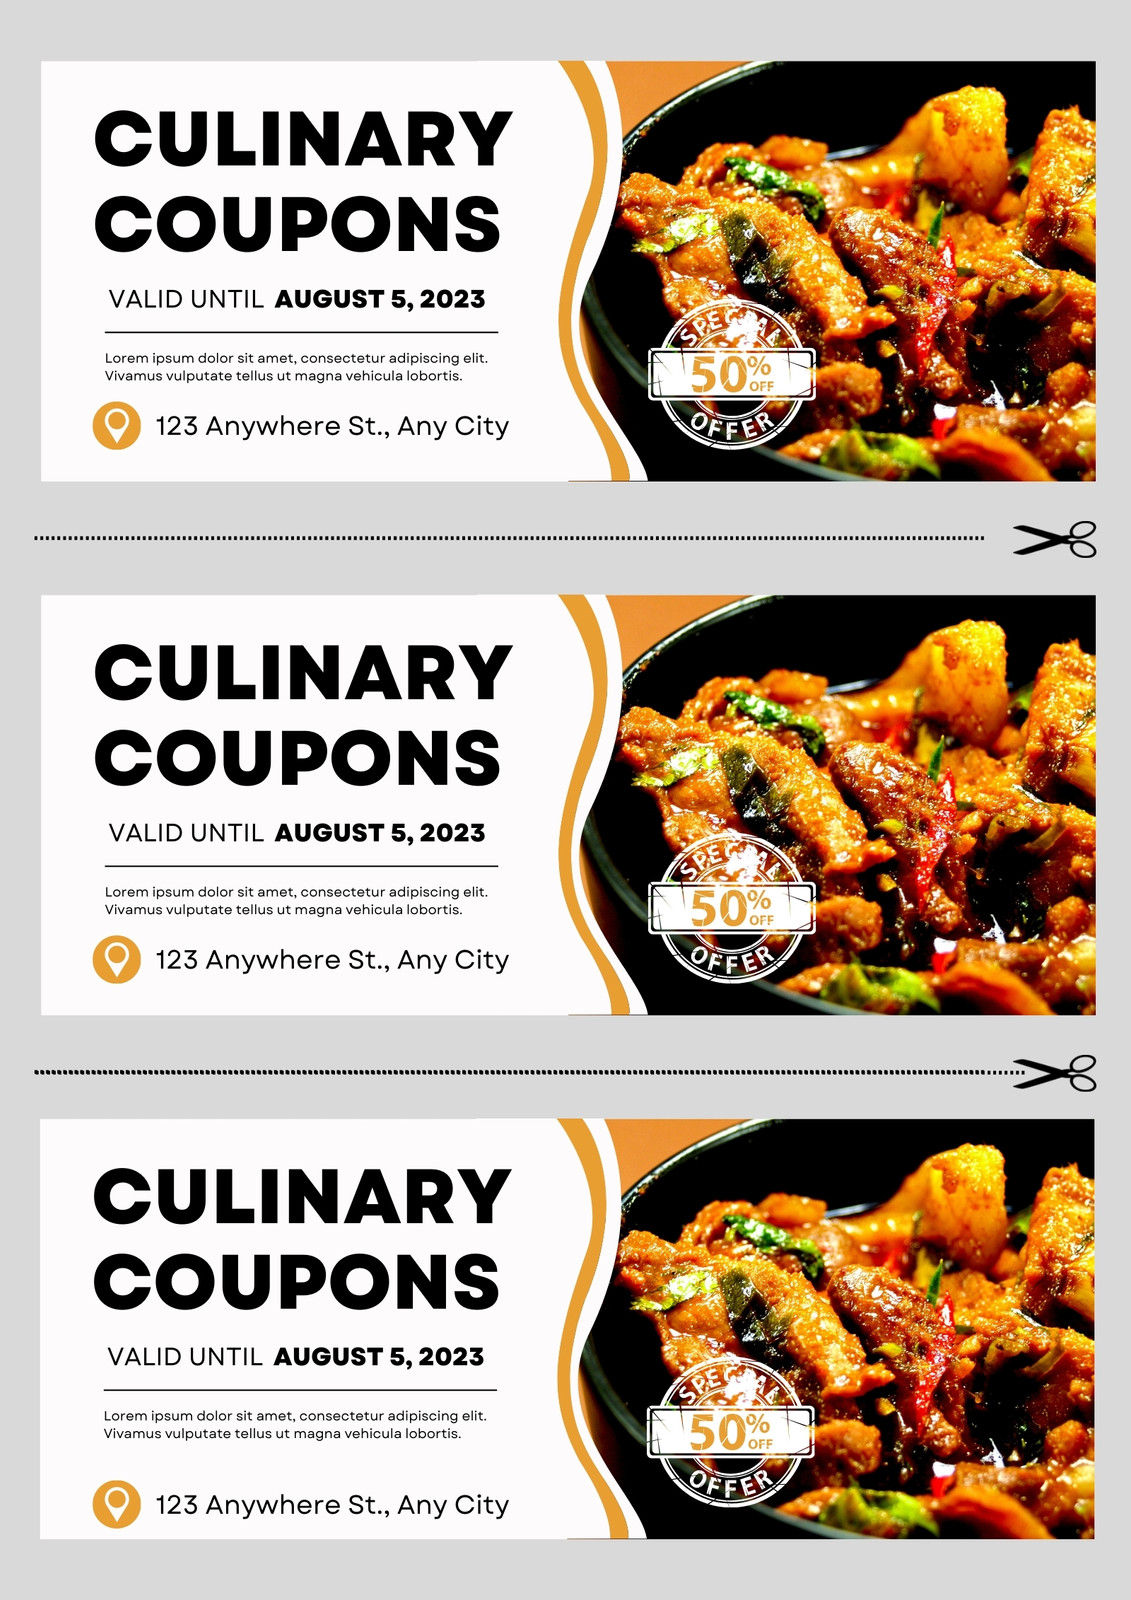 Today's Top Restaurant Coupons